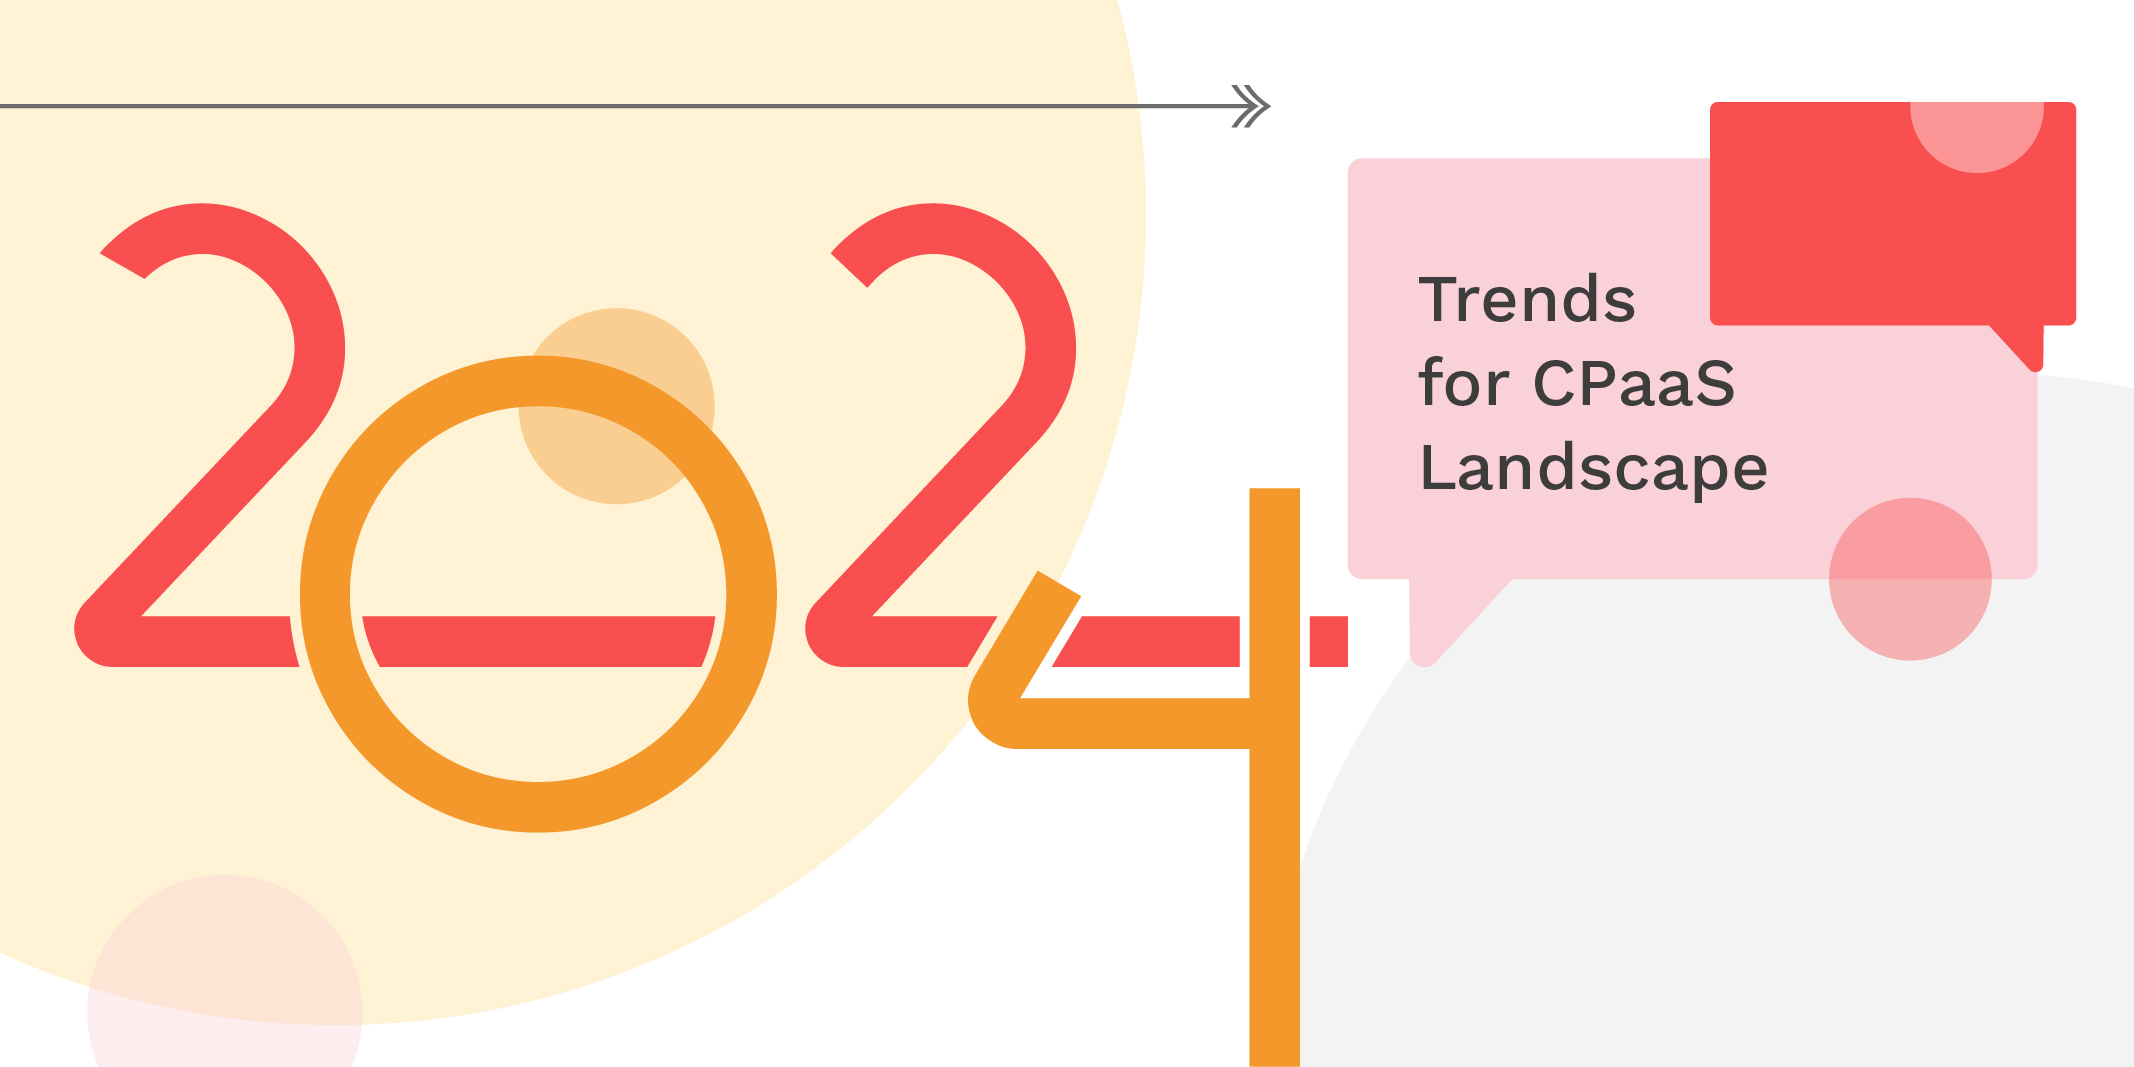 Trends for CPaaS Landscape